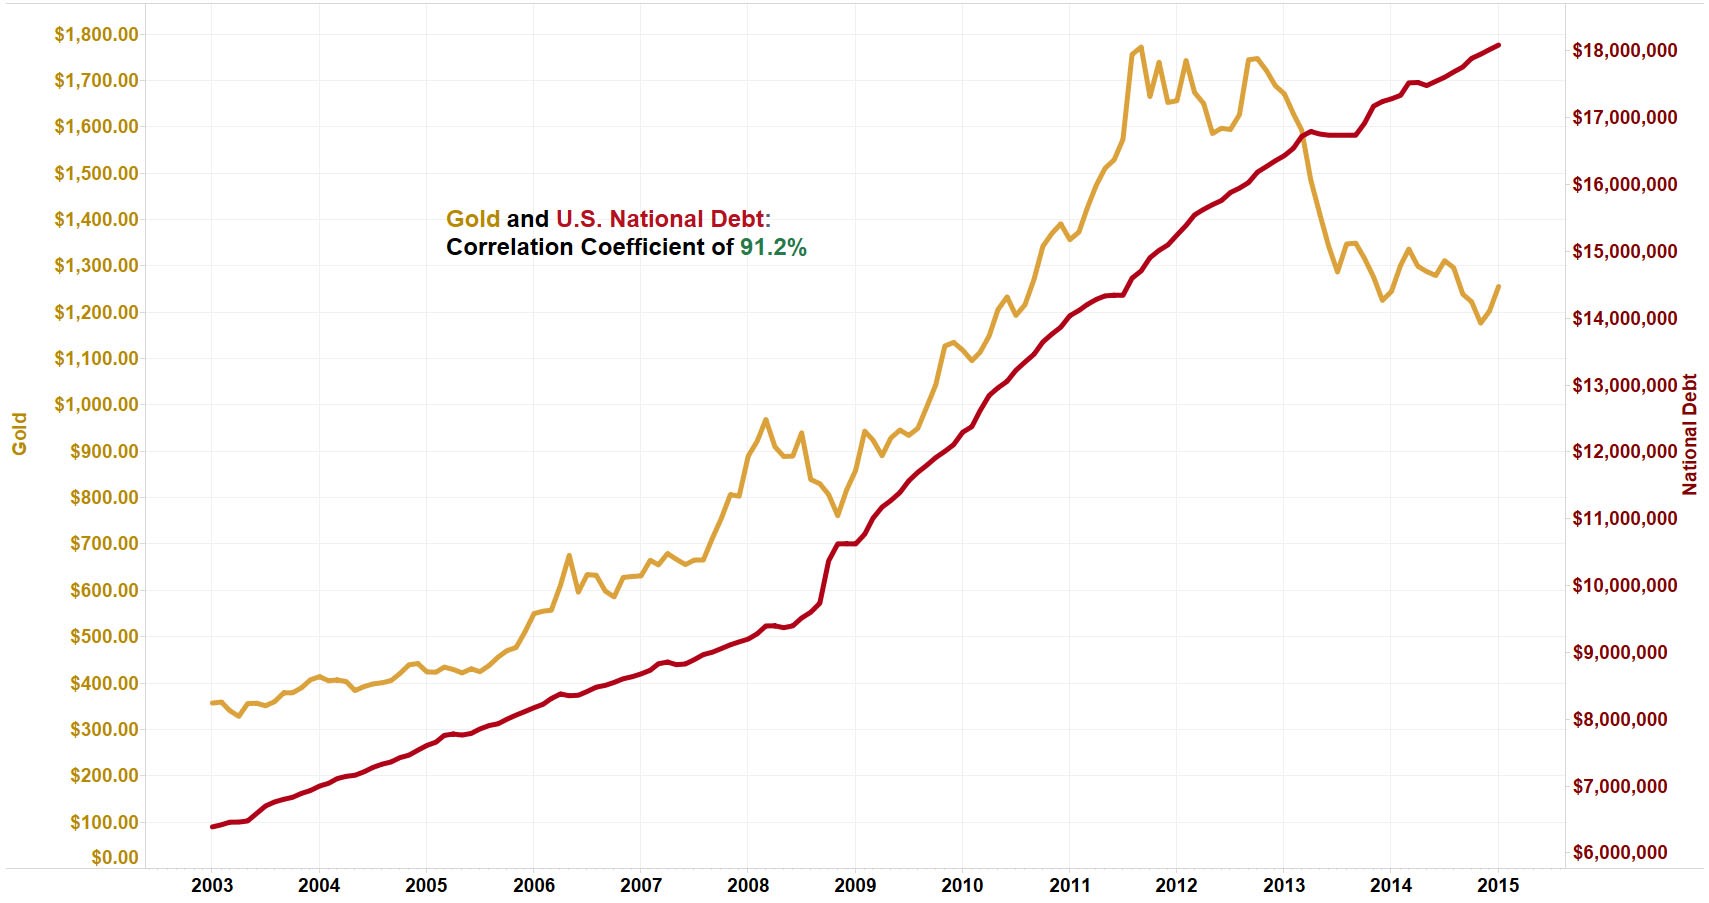 National Debt and Gold Price Correlation